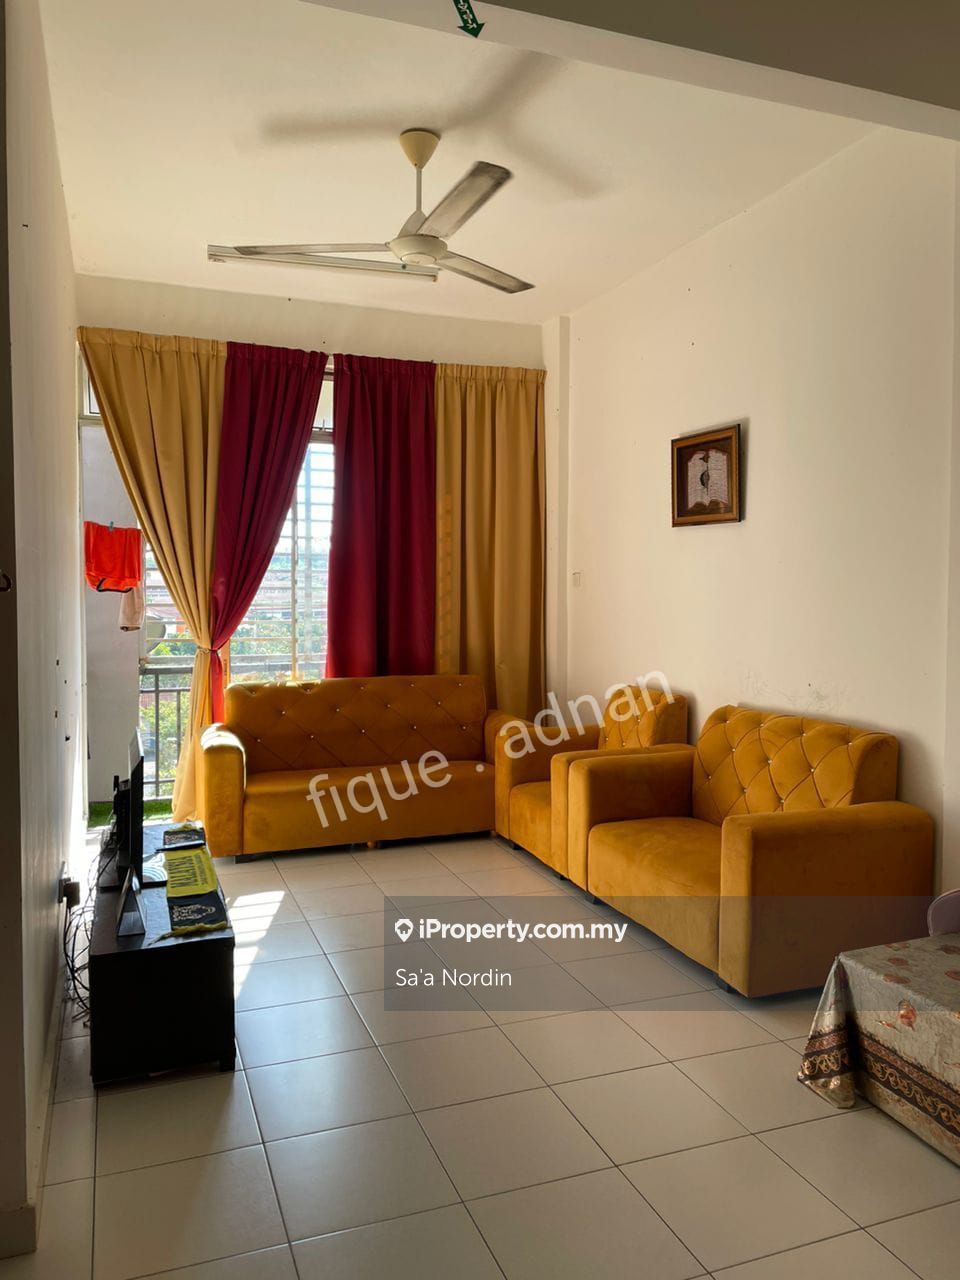 Dahlia Court Apartment 3 bedrooms for sale in Sepang, Selangor ...